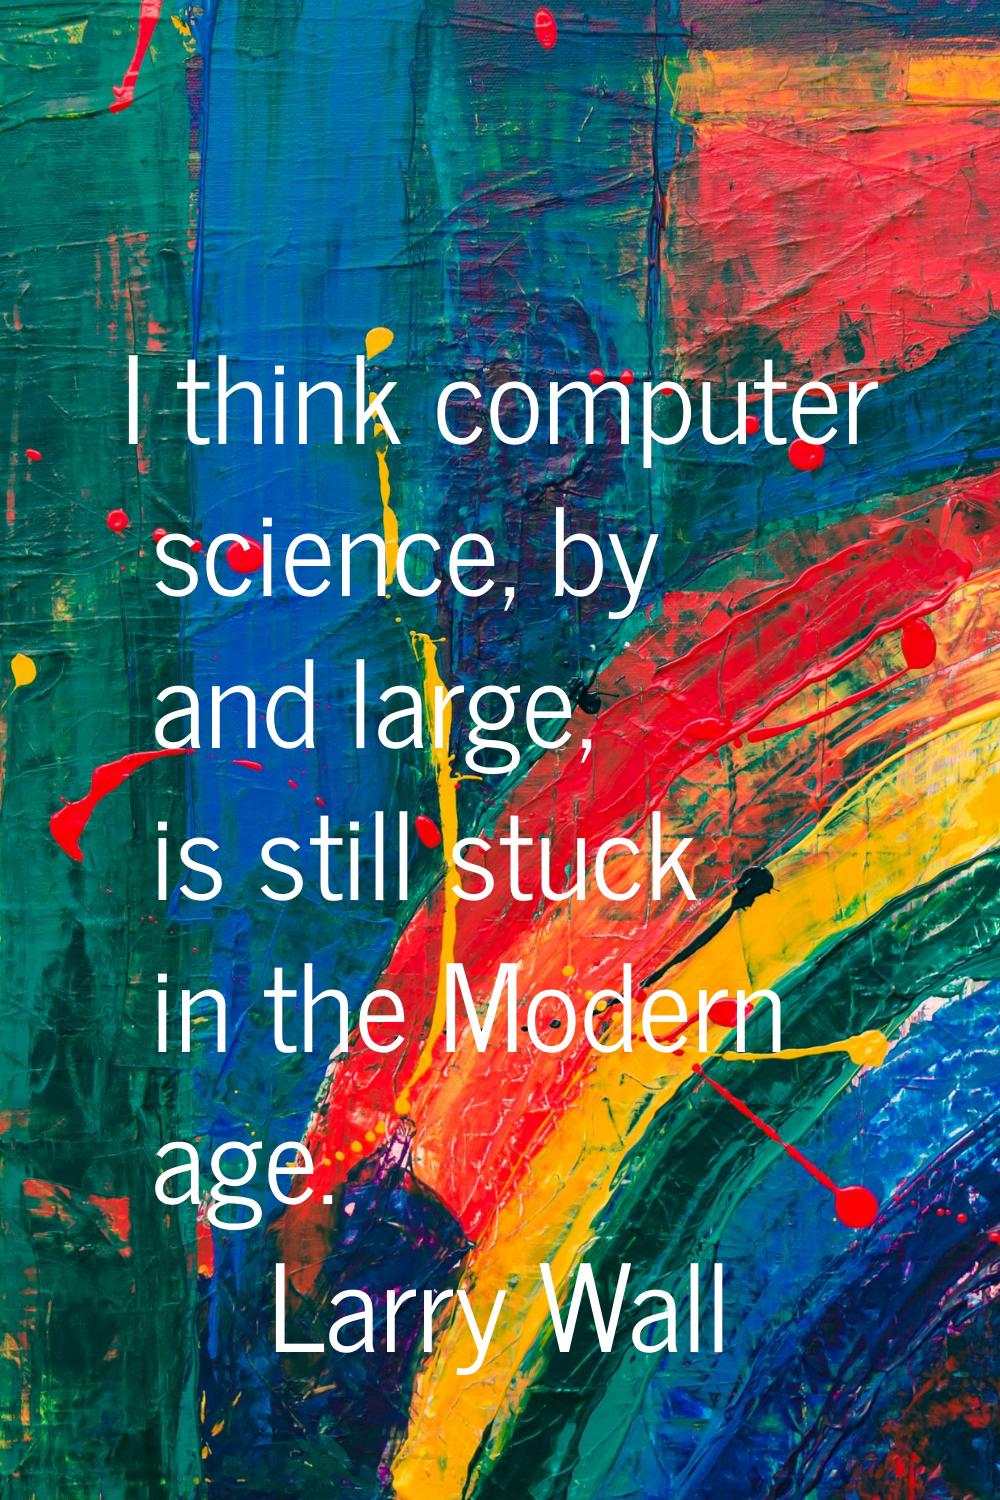 I think computer science, by and large, is still stuck in the Modern age.